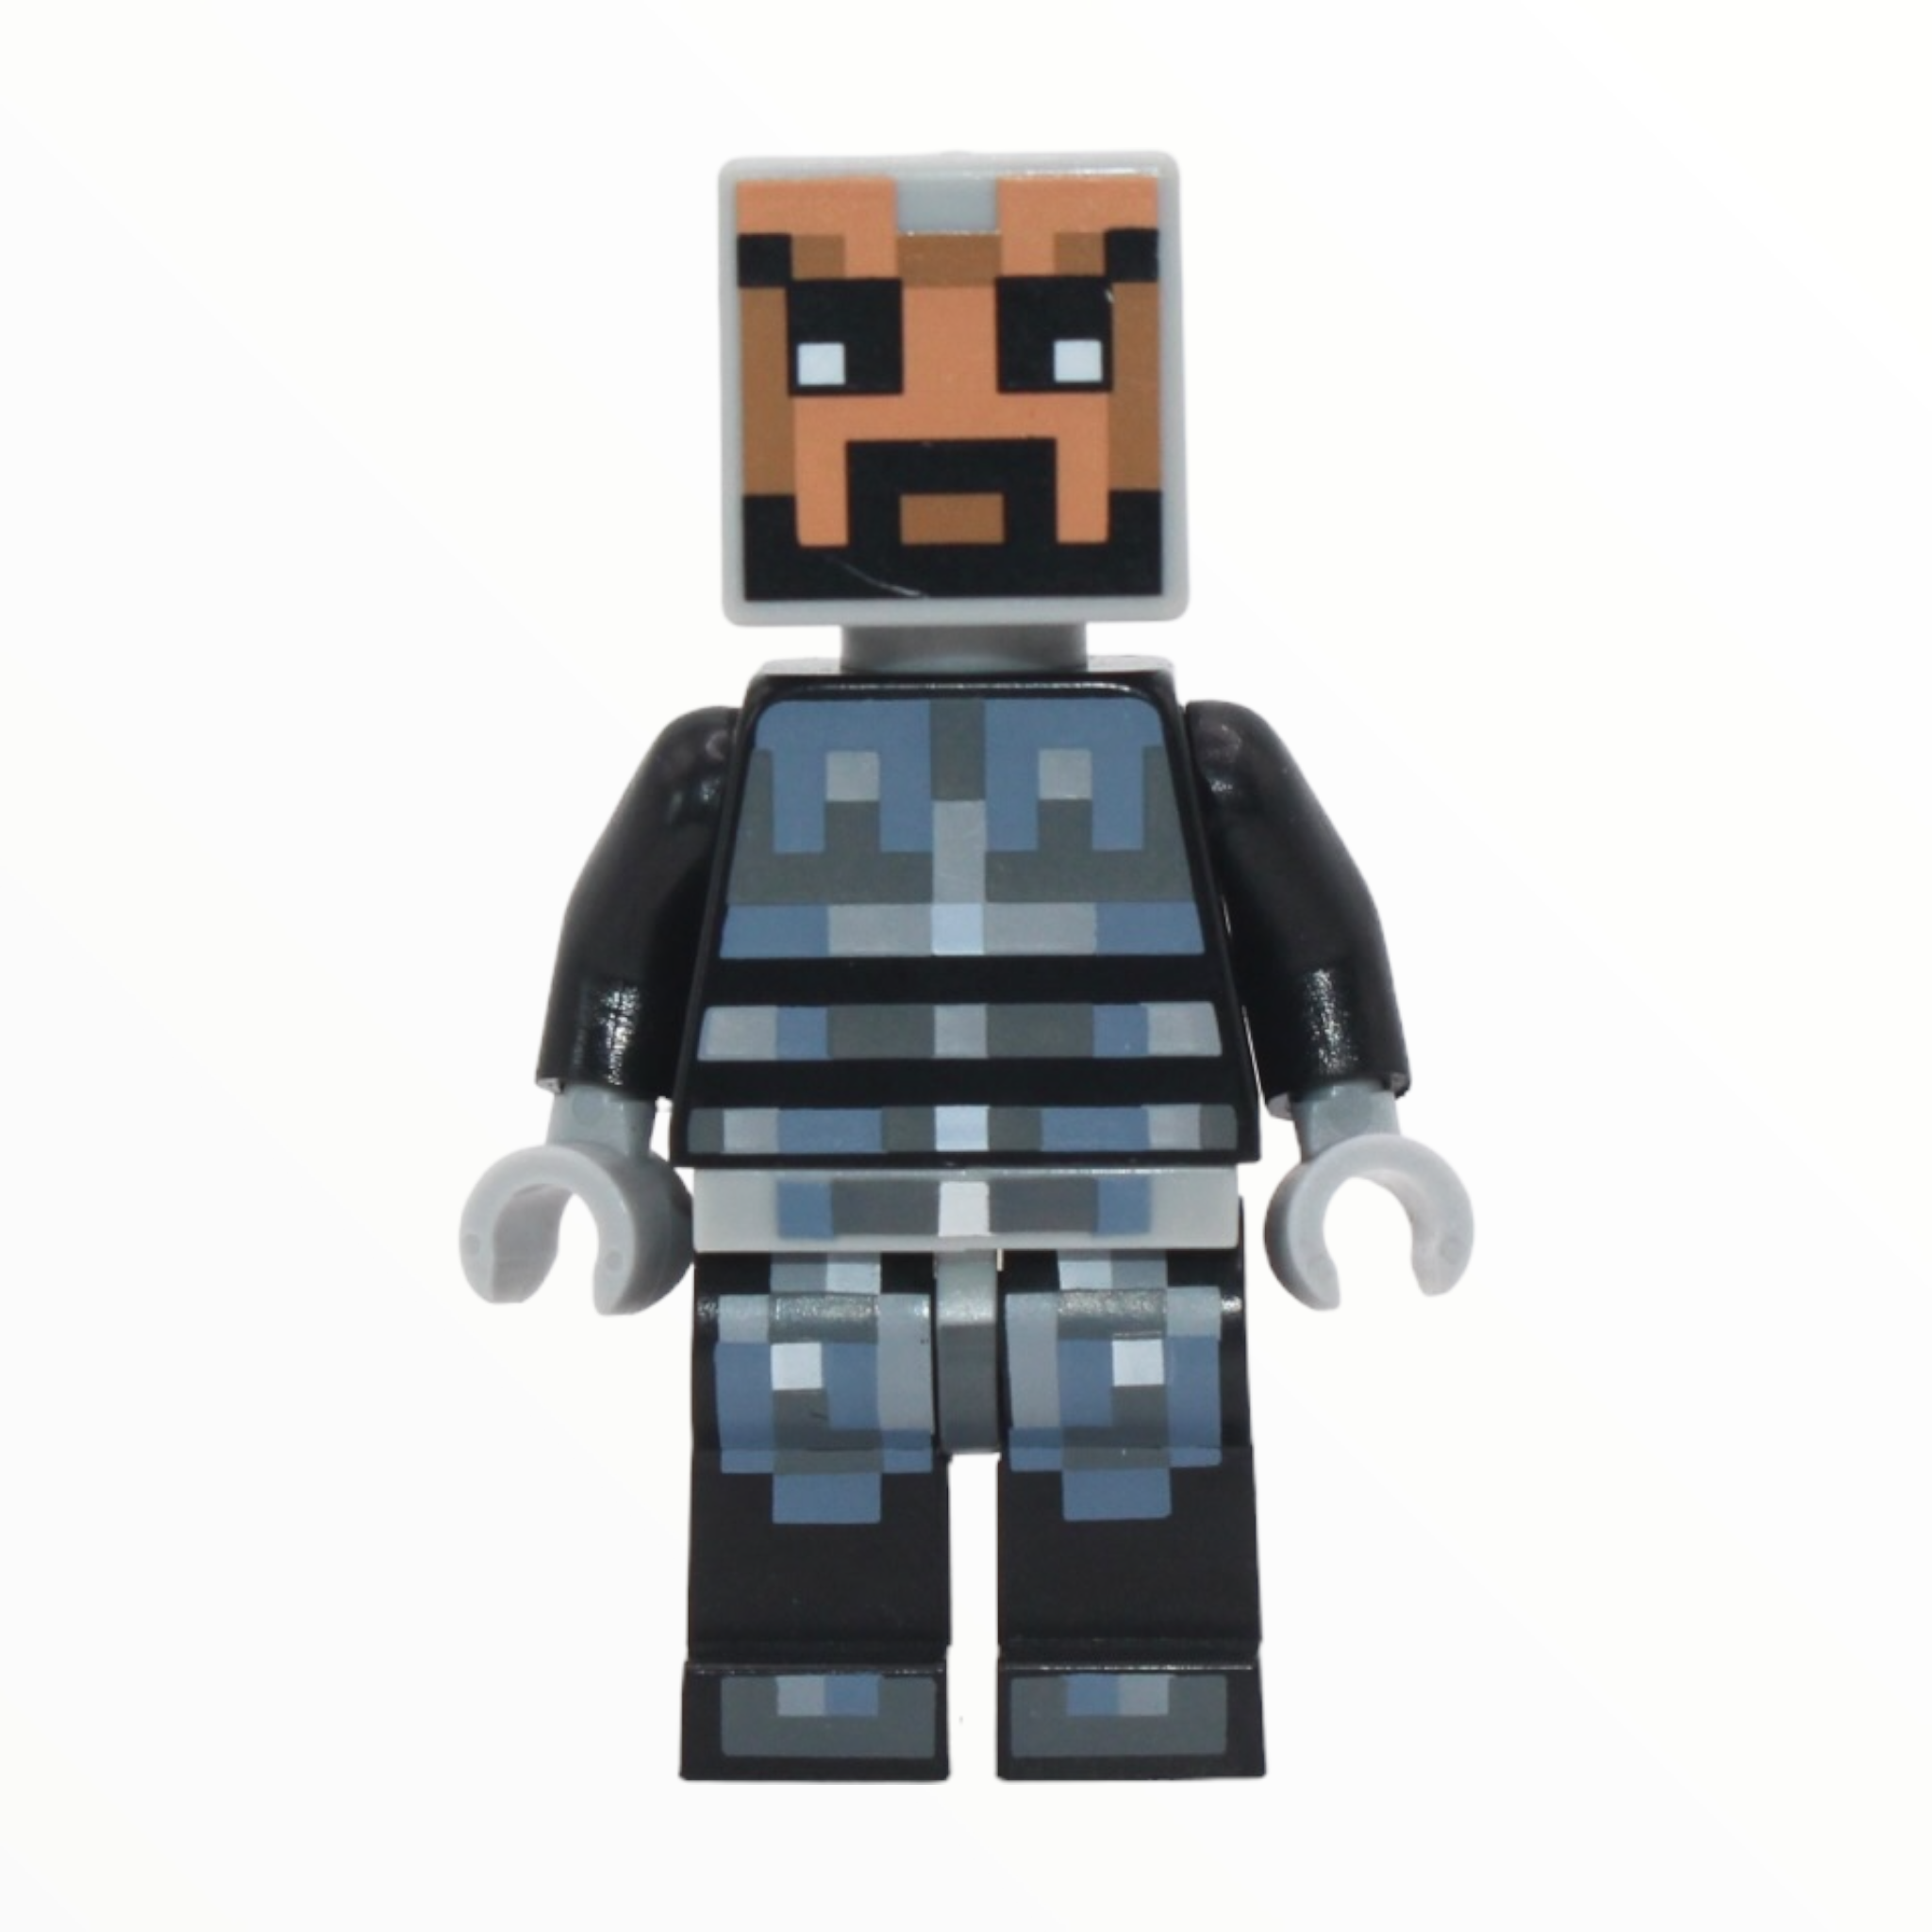 Minecraft Skin 5 (black and silver armor)